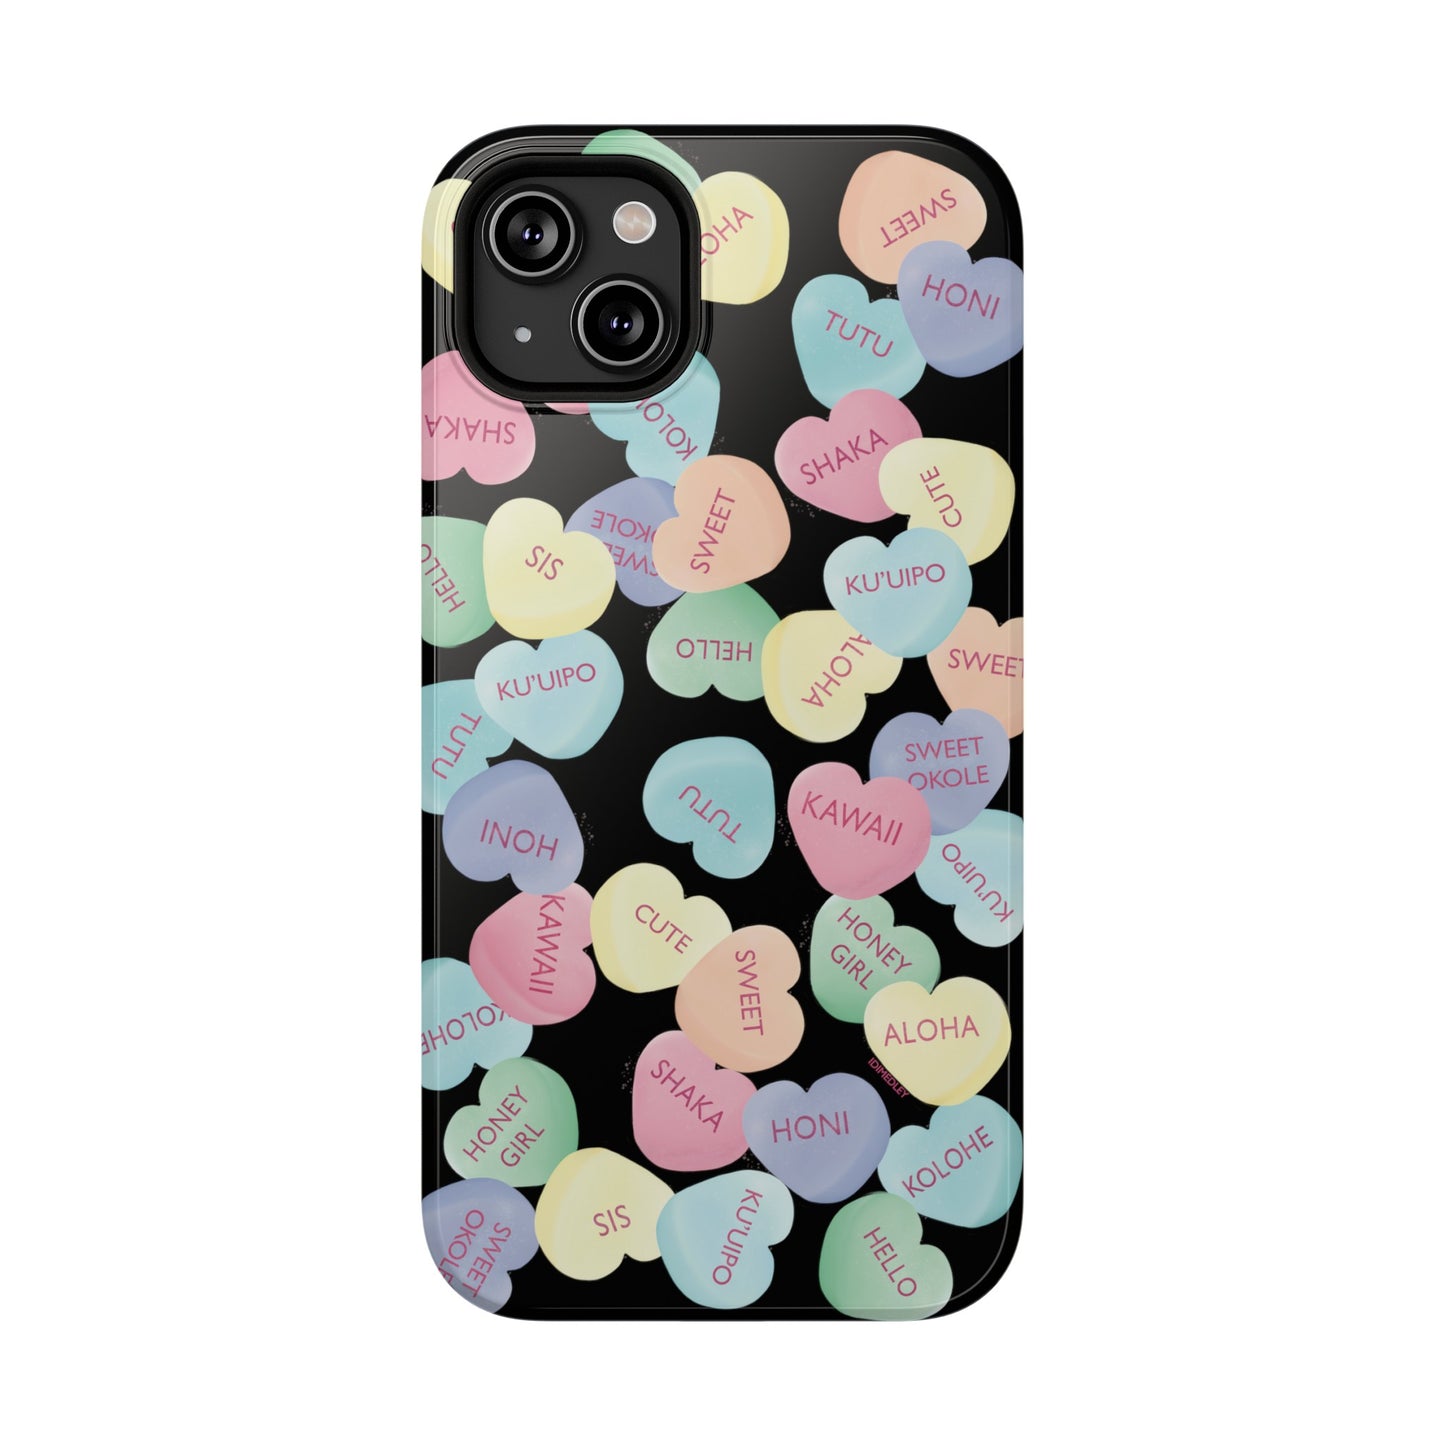 Candy Conversation Hearts Hawaii Style (Black)